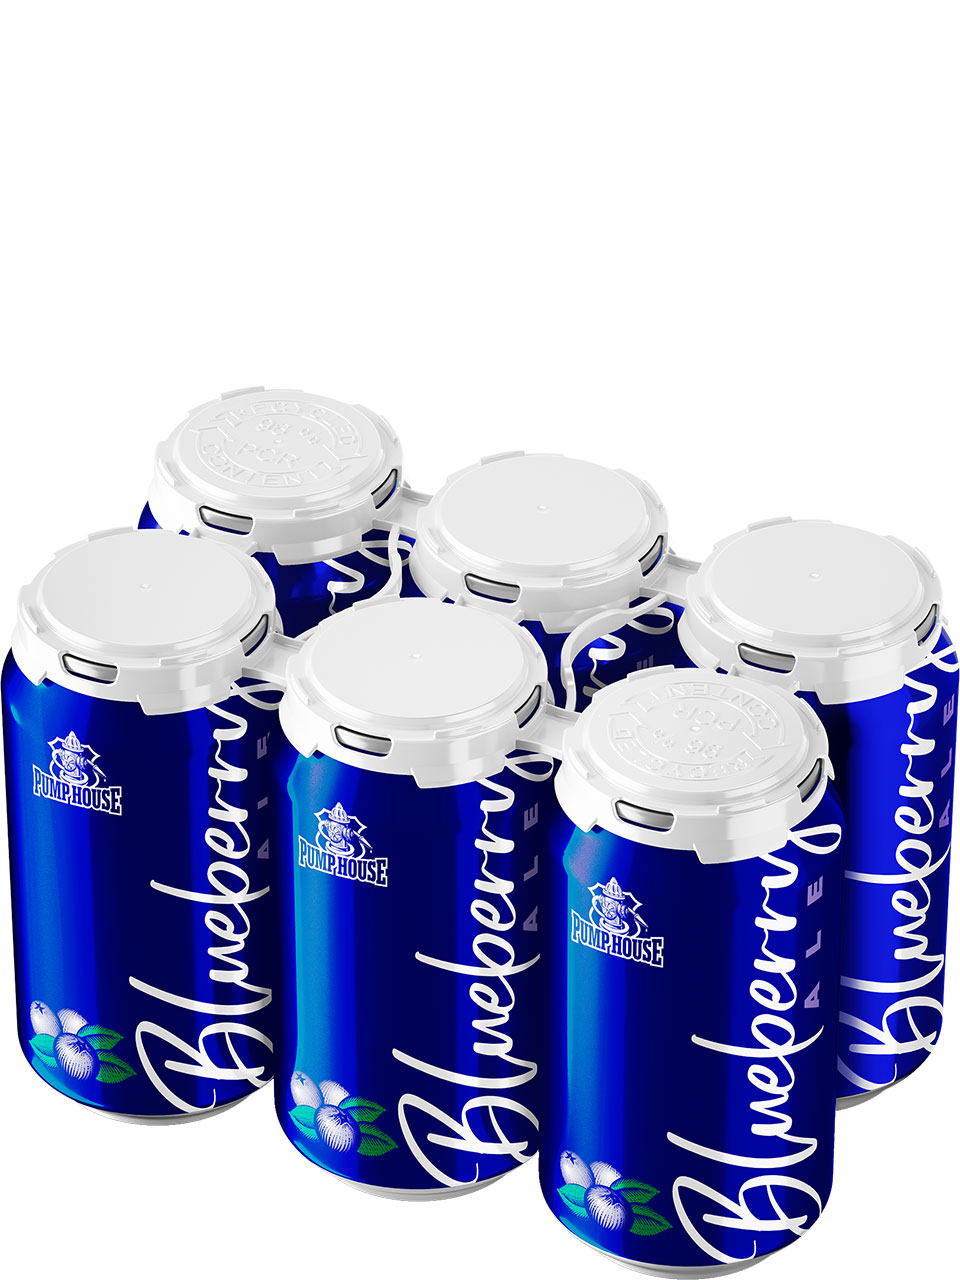 Pump House Blueberry Ale 6 Pack Cans